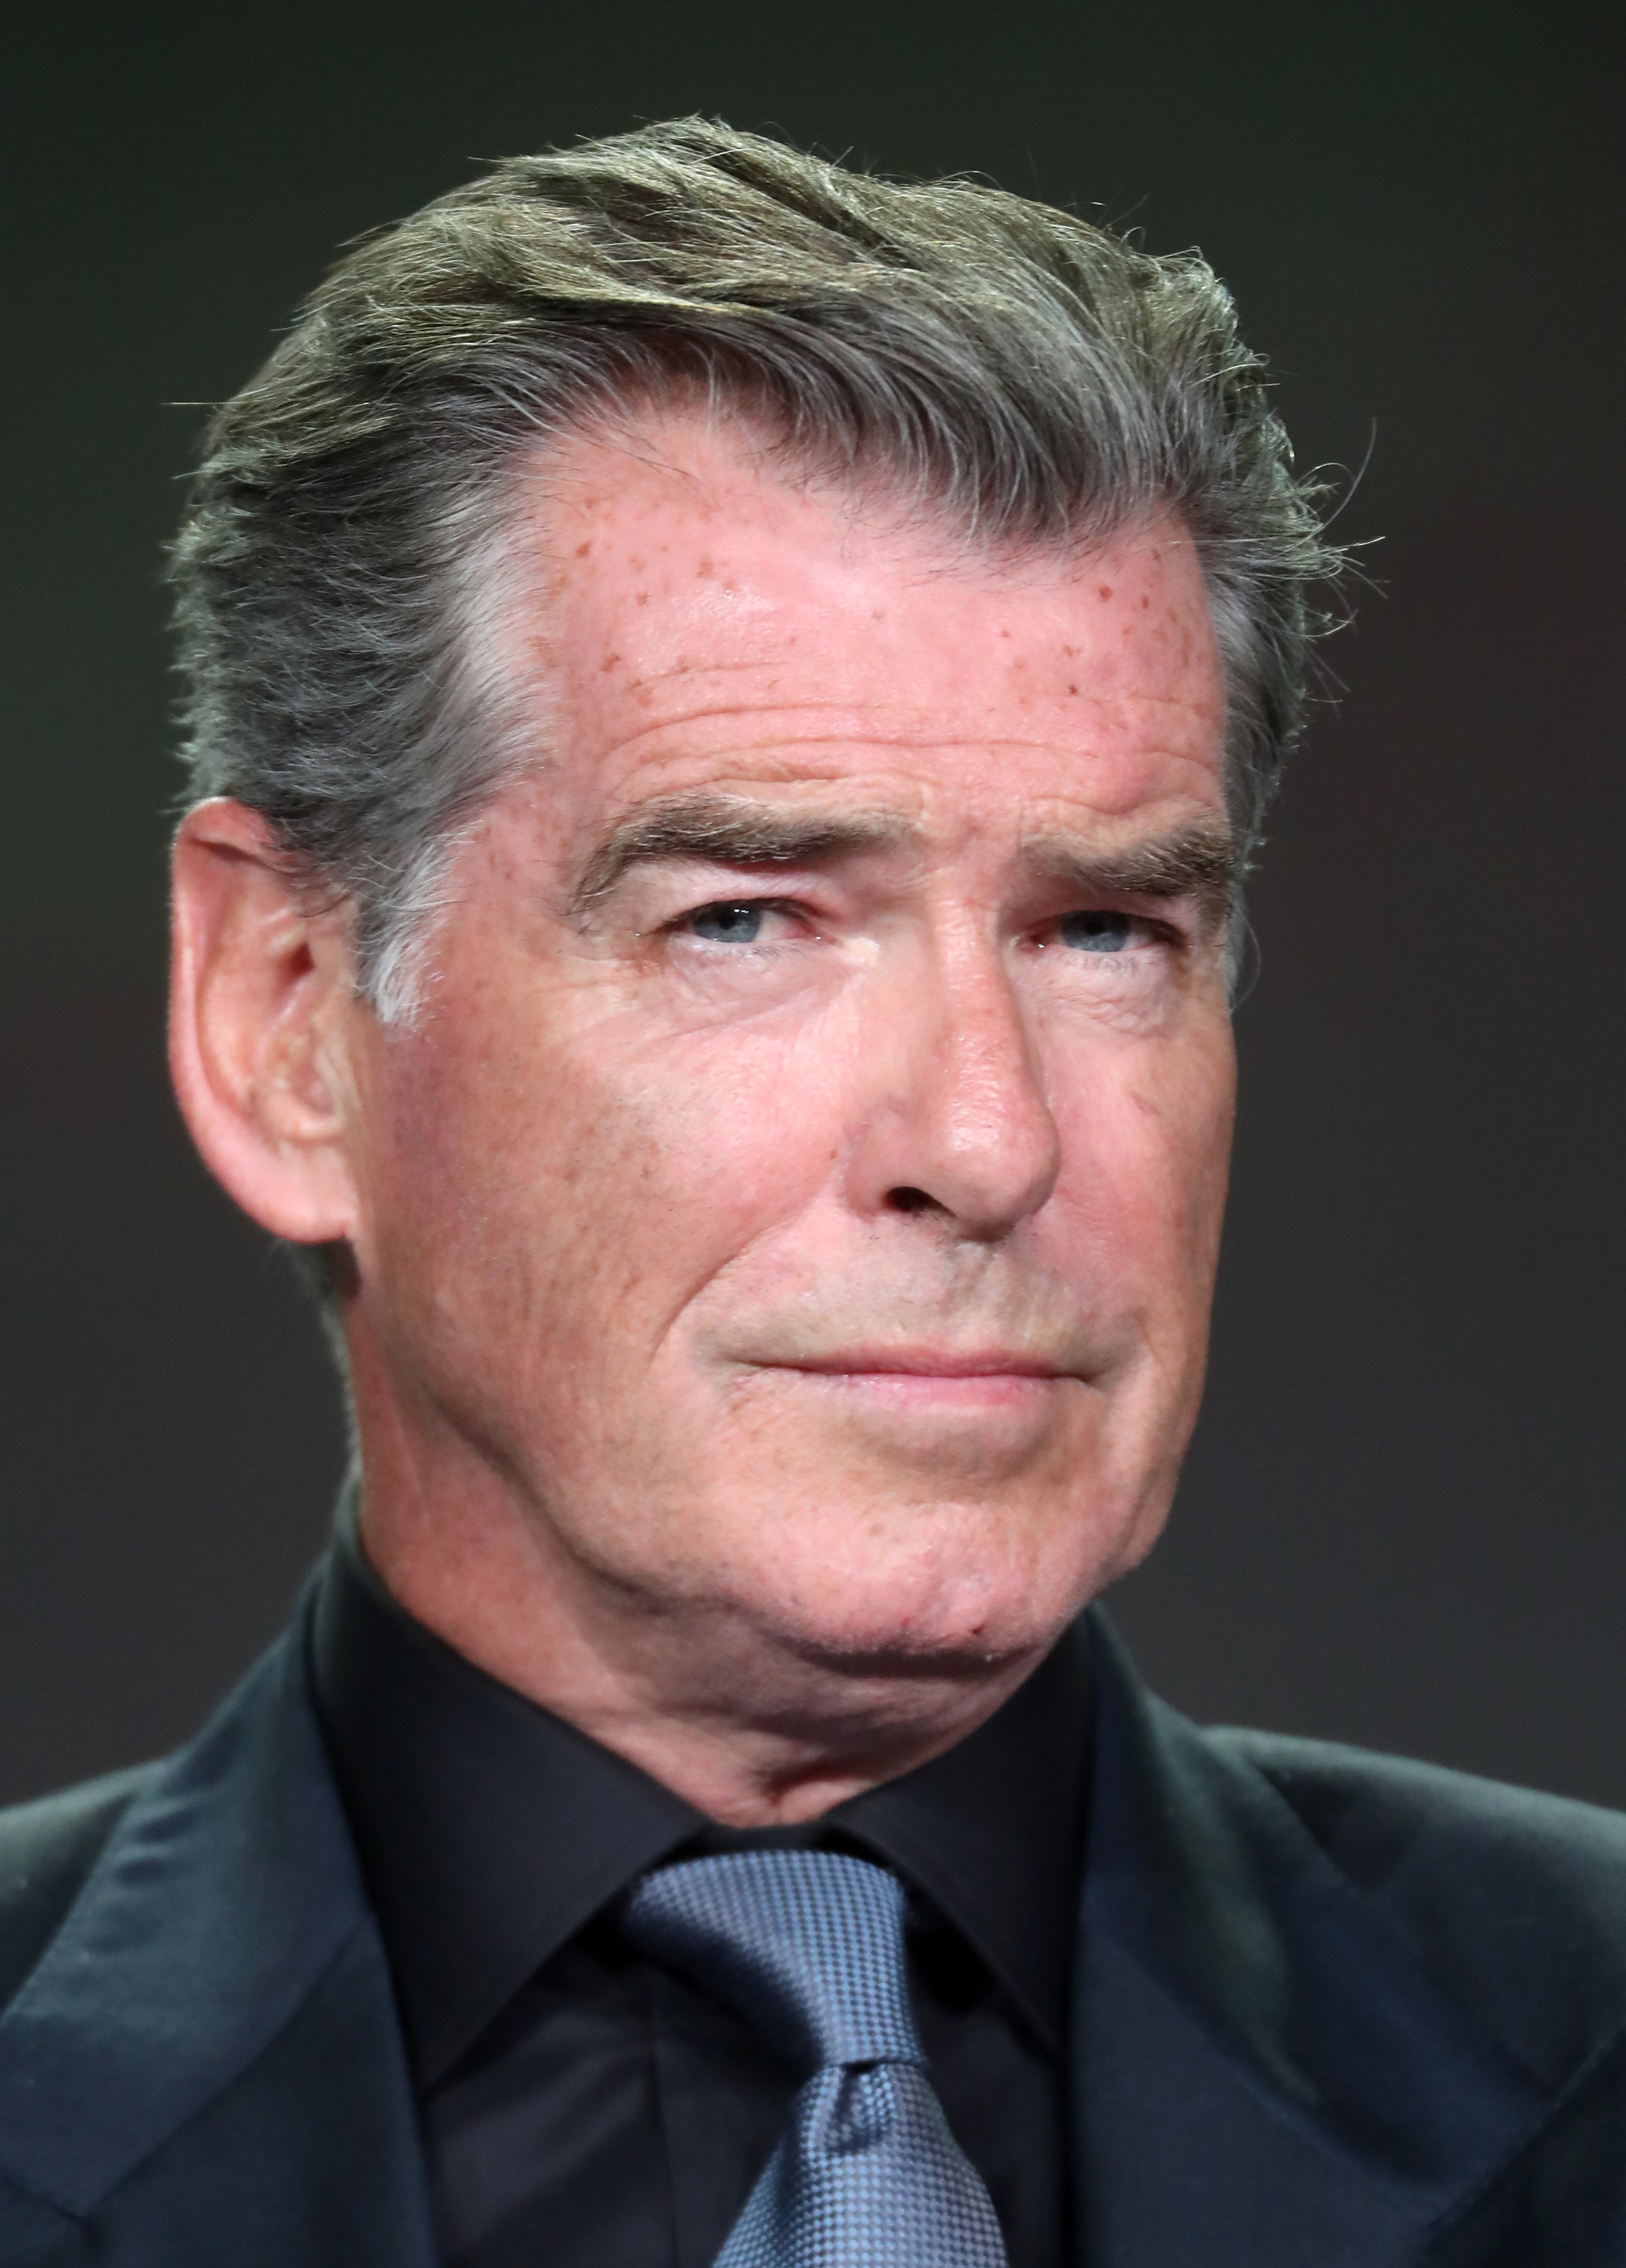 Pierce Brosnan of the series 'The Son' speaks onstage during the AMC portion of the 2017 Winter Television Critics Association Press Tour at the Langham Hotel on January 14, 2017 in Pasadena, California. | Source: Getty Images